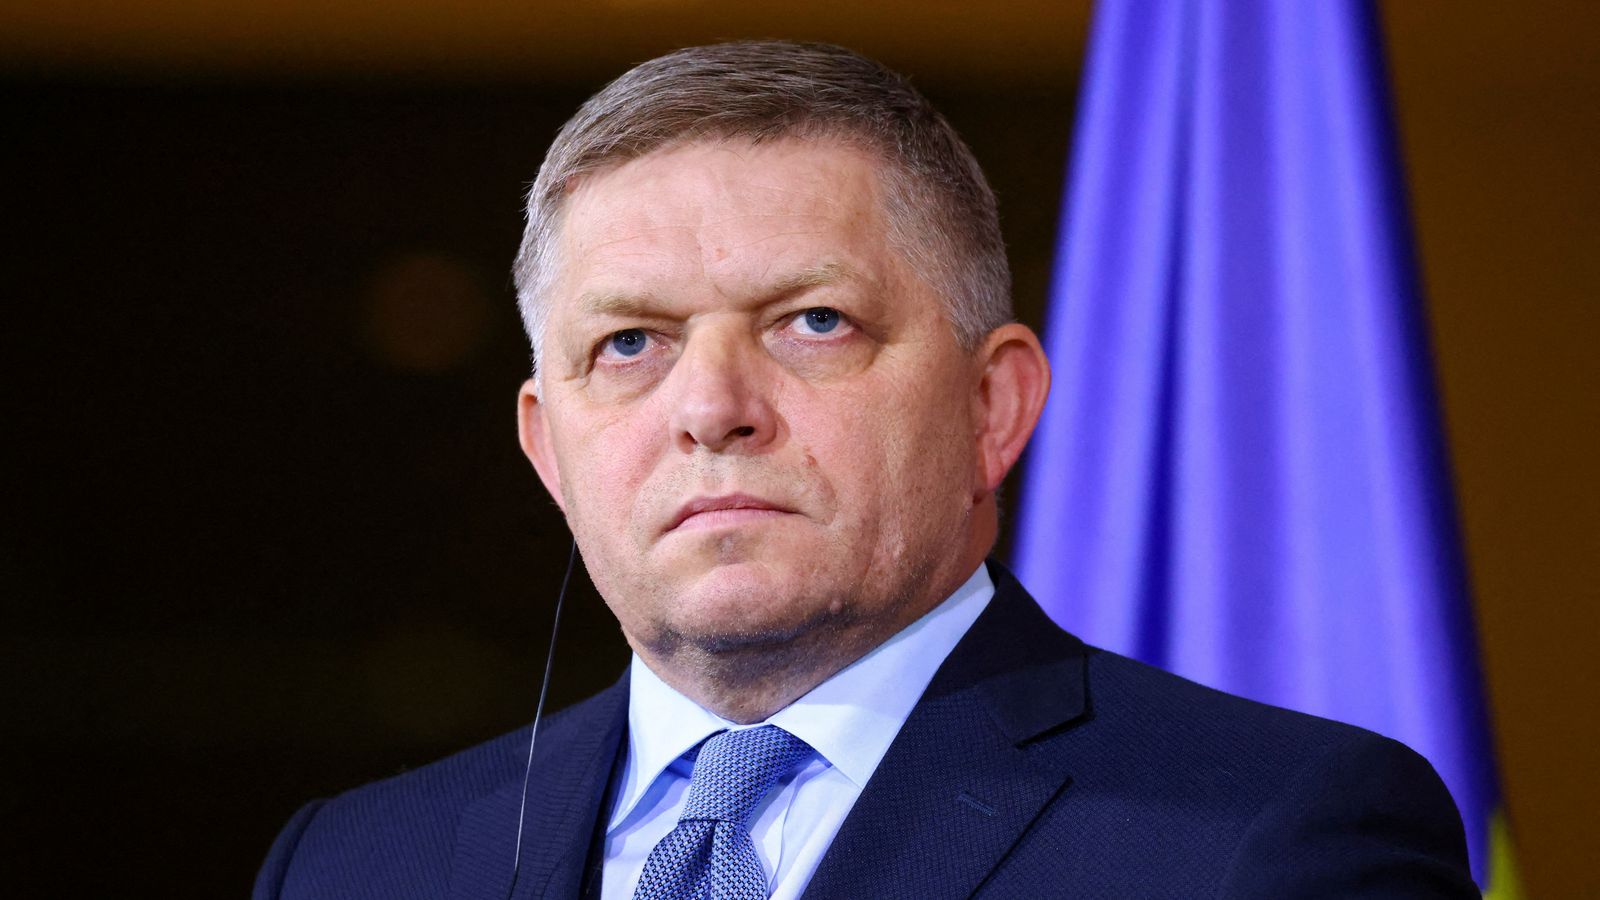 Who is Slovak populist prime minister Robert Fico?